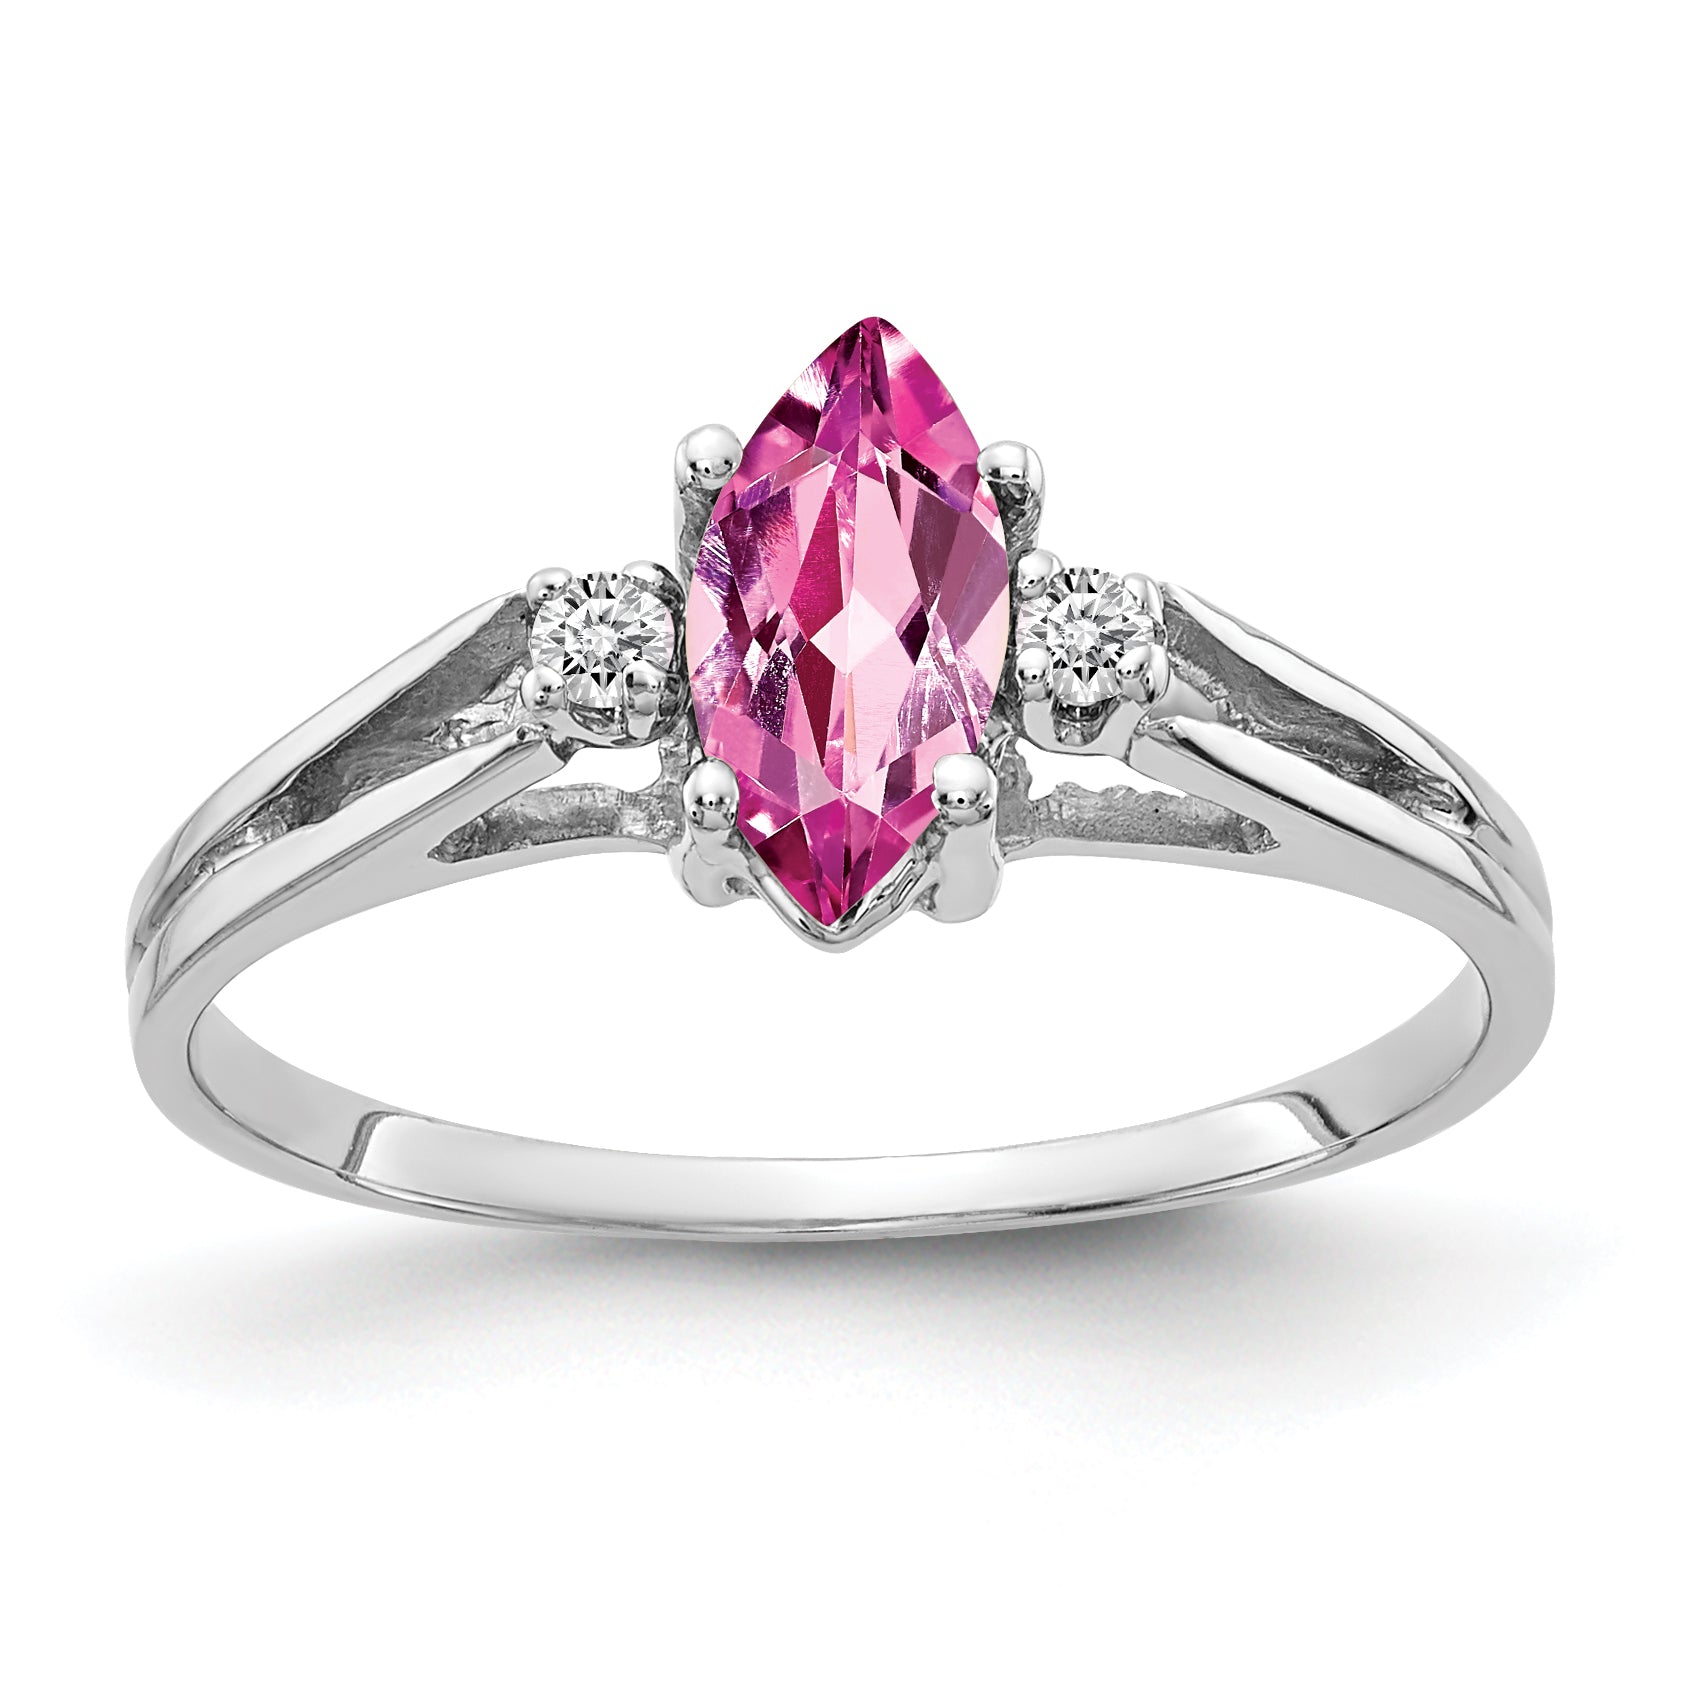 Image of ID 1 14k White Gold 8x4mm Marquise Pink Sapphire VS Diamond ring